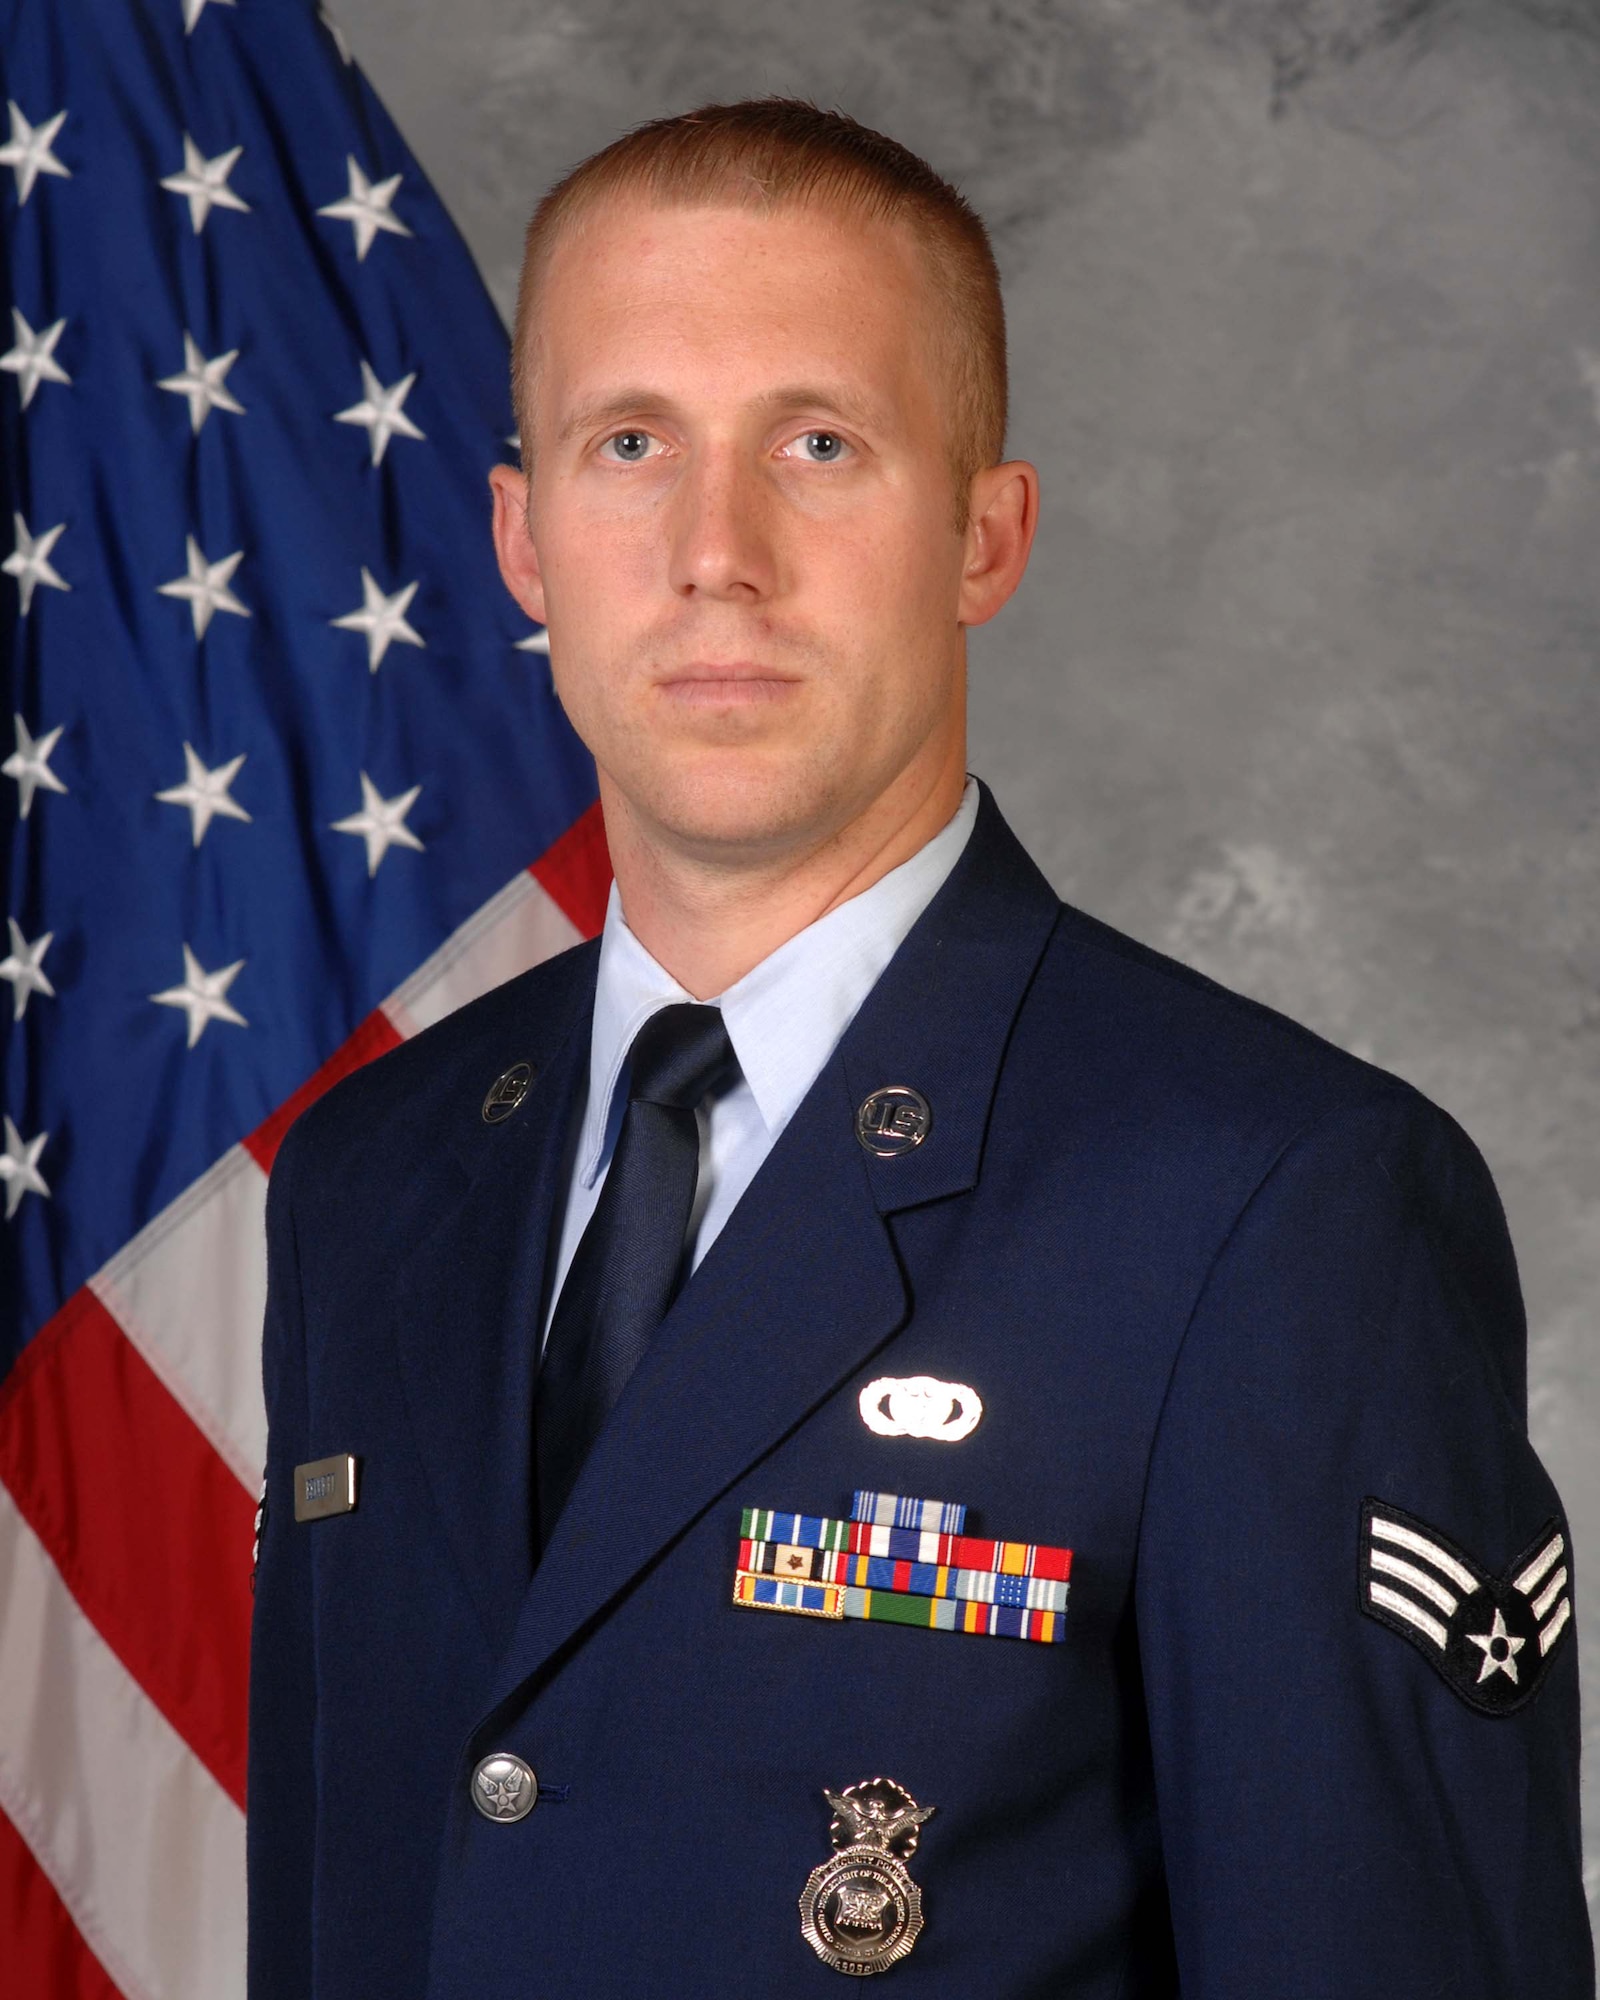 OFFUTT AIR FORCE BASE, Neb. -- Senior Airman William R. Bennett, from Nellis AFB, Nev., is one of 29 Airmen nominated for awards who will attend the 2010 Air Combat Command Outstanding Airmen of the Year Awards Banquet in Omaha, Neb., April 21. Airman Bennett is nominated for the Airman of the Year Award. U.S. Air Force courtesy photo